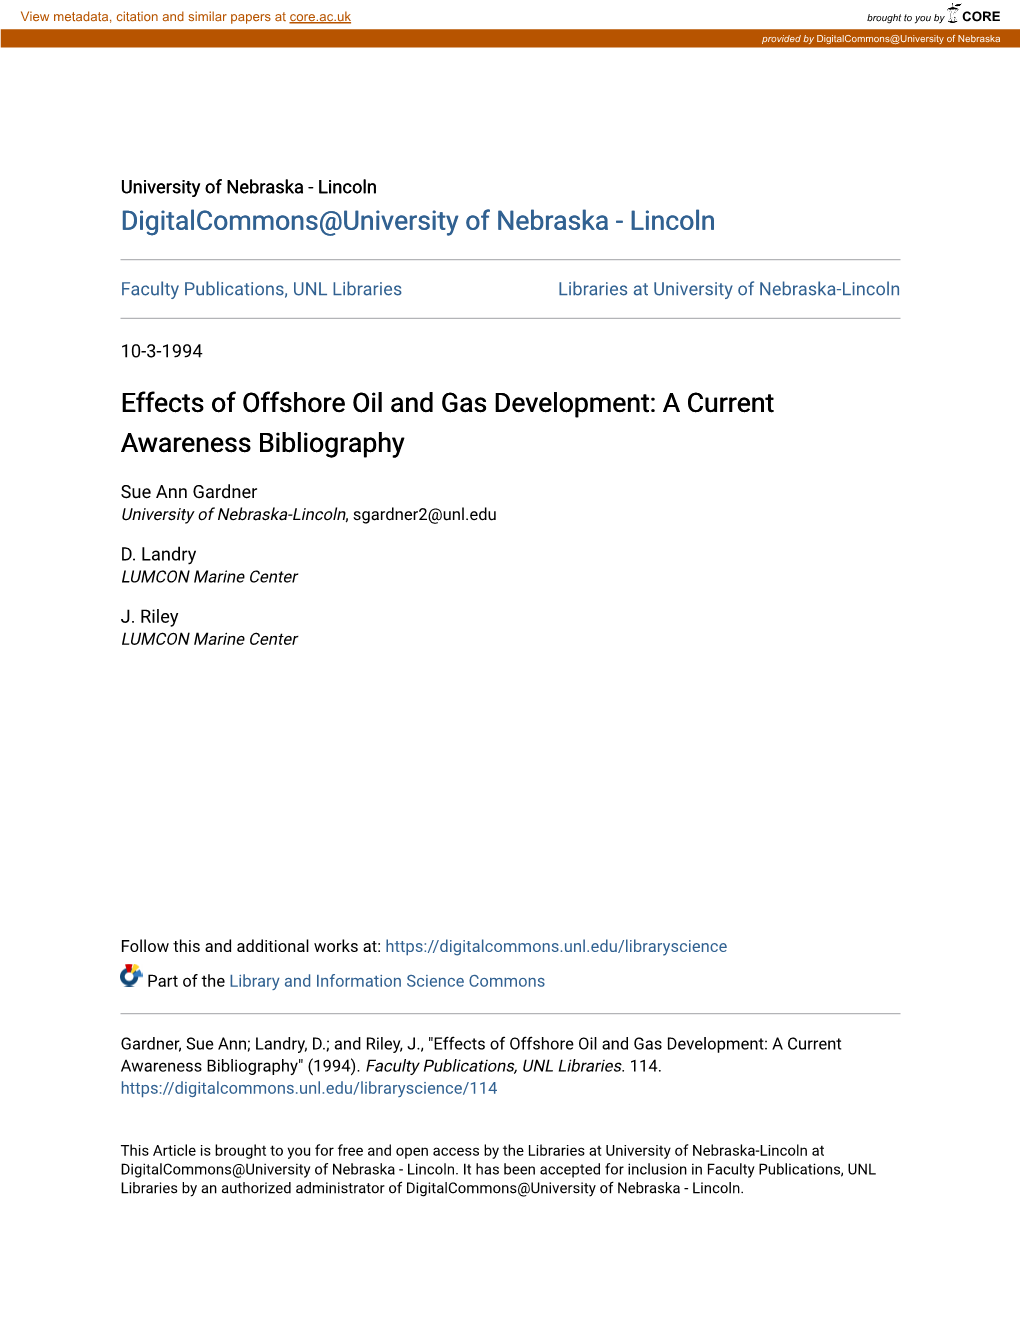 Effects of Offshore Oil and Gas Development: a Current Awareness Bibliography